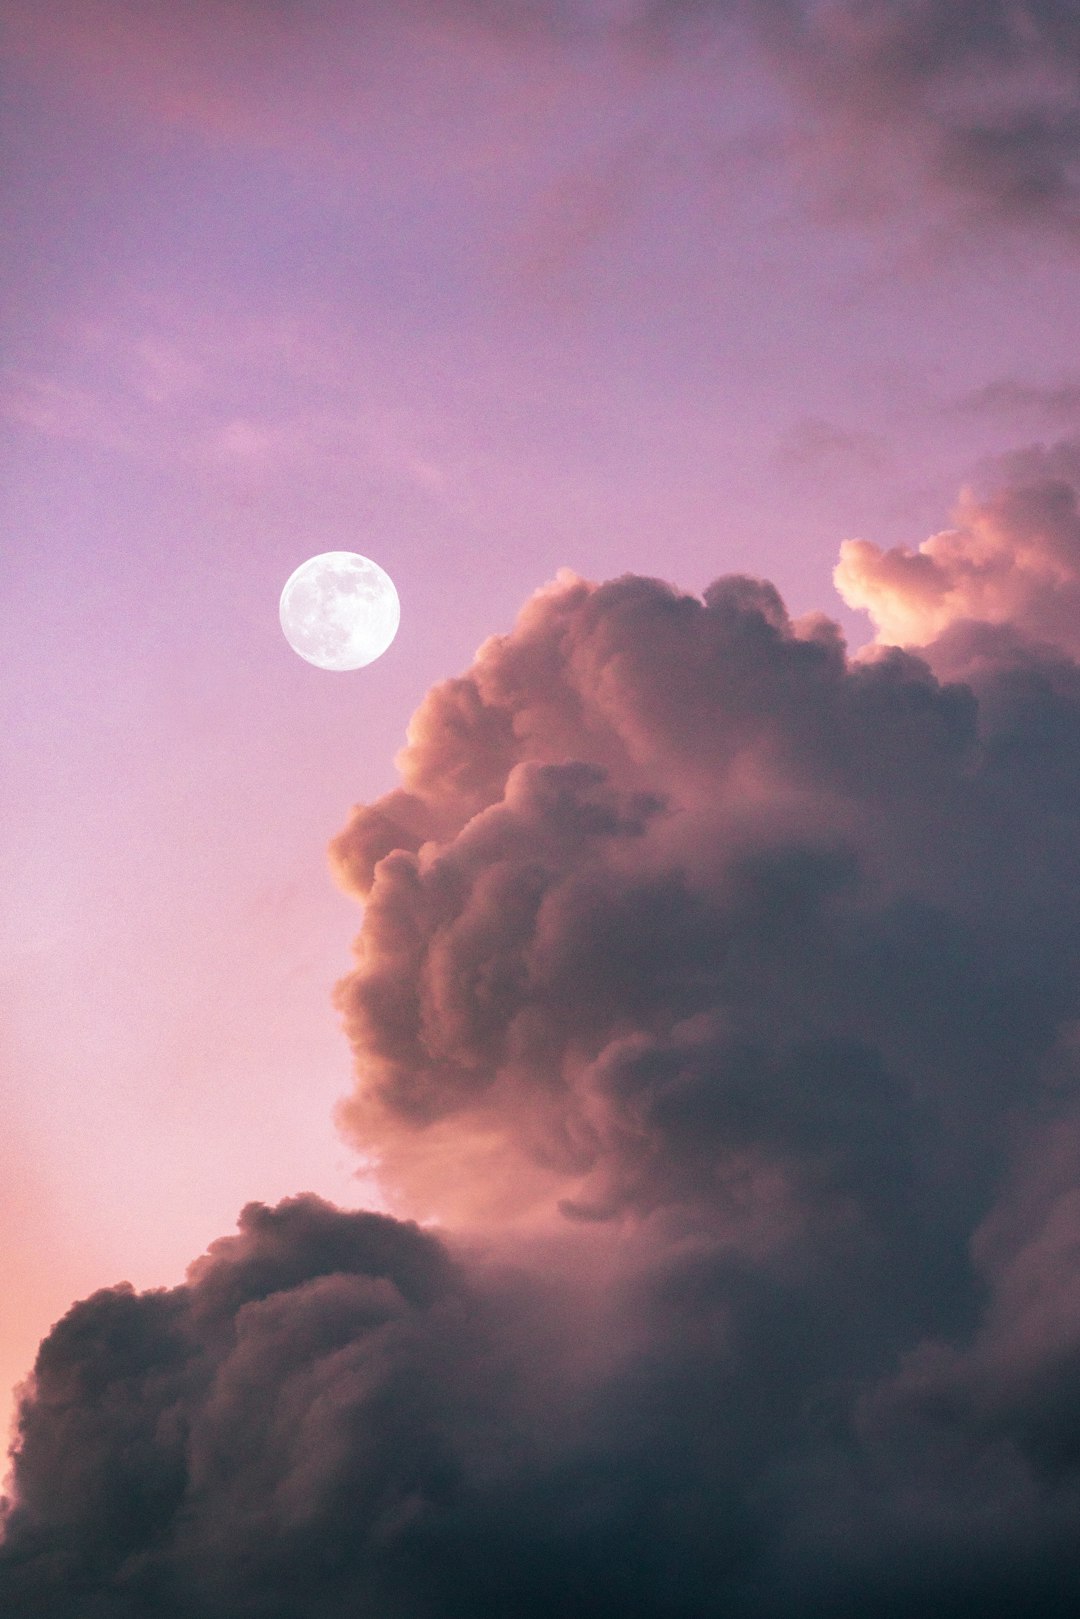 full moon over clouds during night time